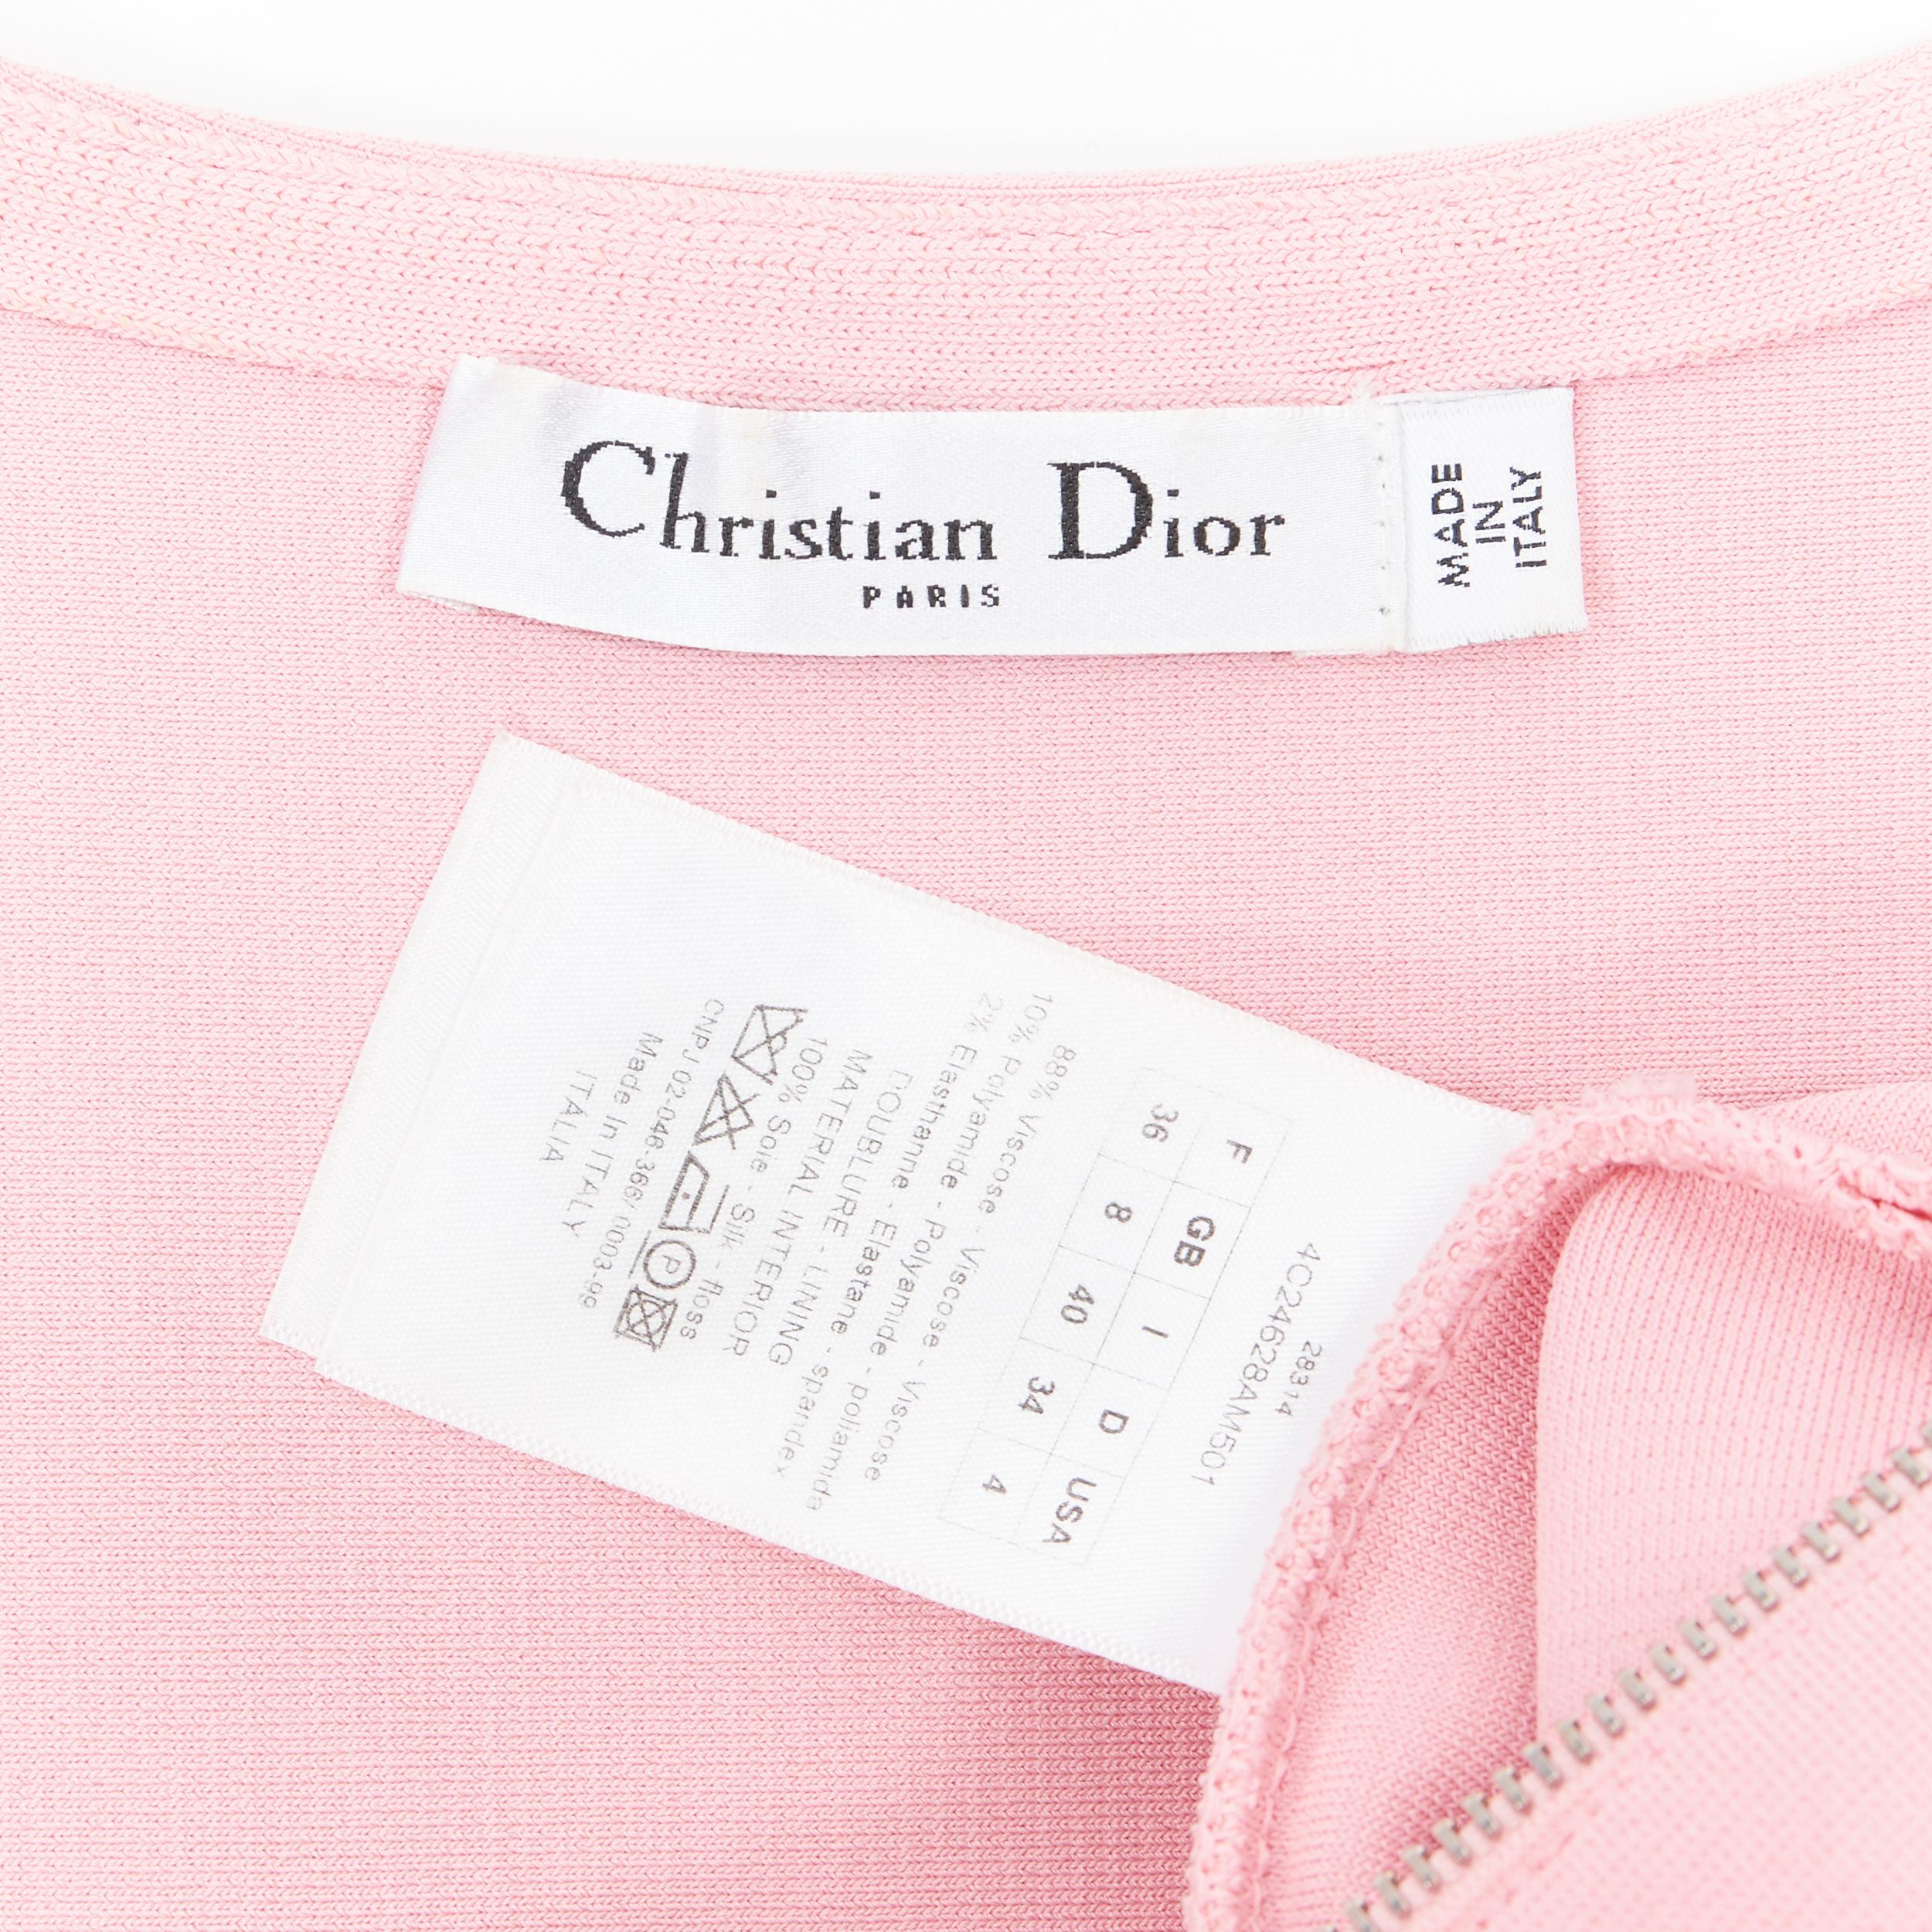 CHRISTIAN DIOR pink viscose knit exposed zip nipped waist bodycon dress FR36 2